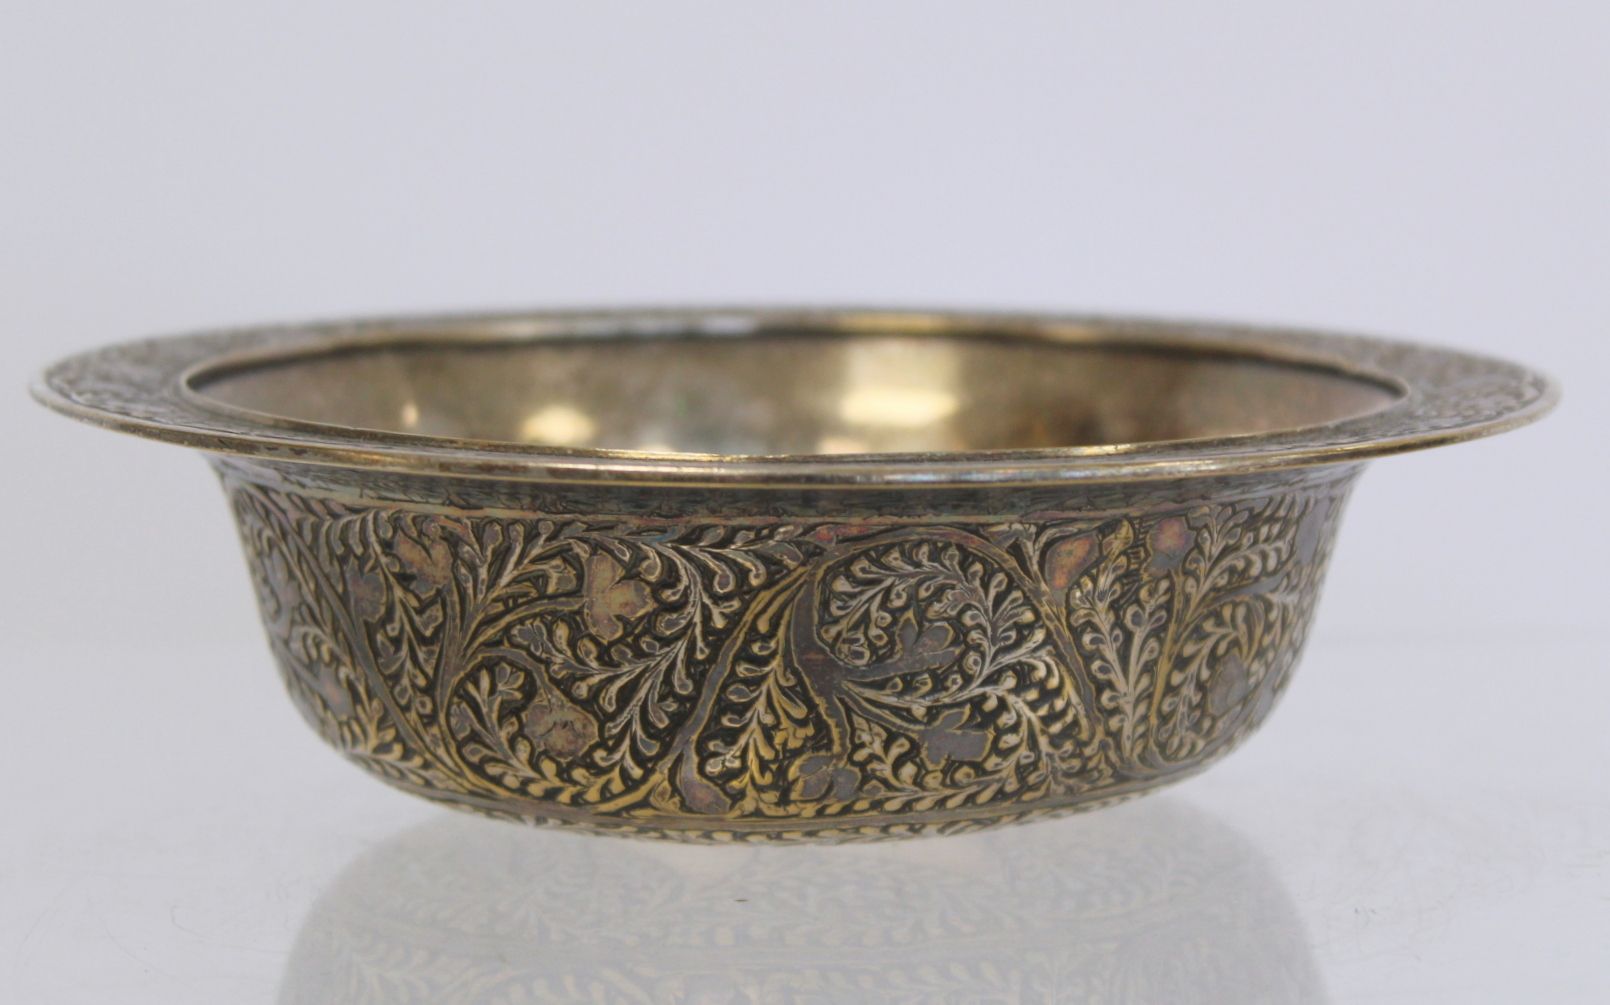 Oriental silvered circular brass bowl with engraved floral and foliate decoration, 16cm diam. - Image 4 of 9